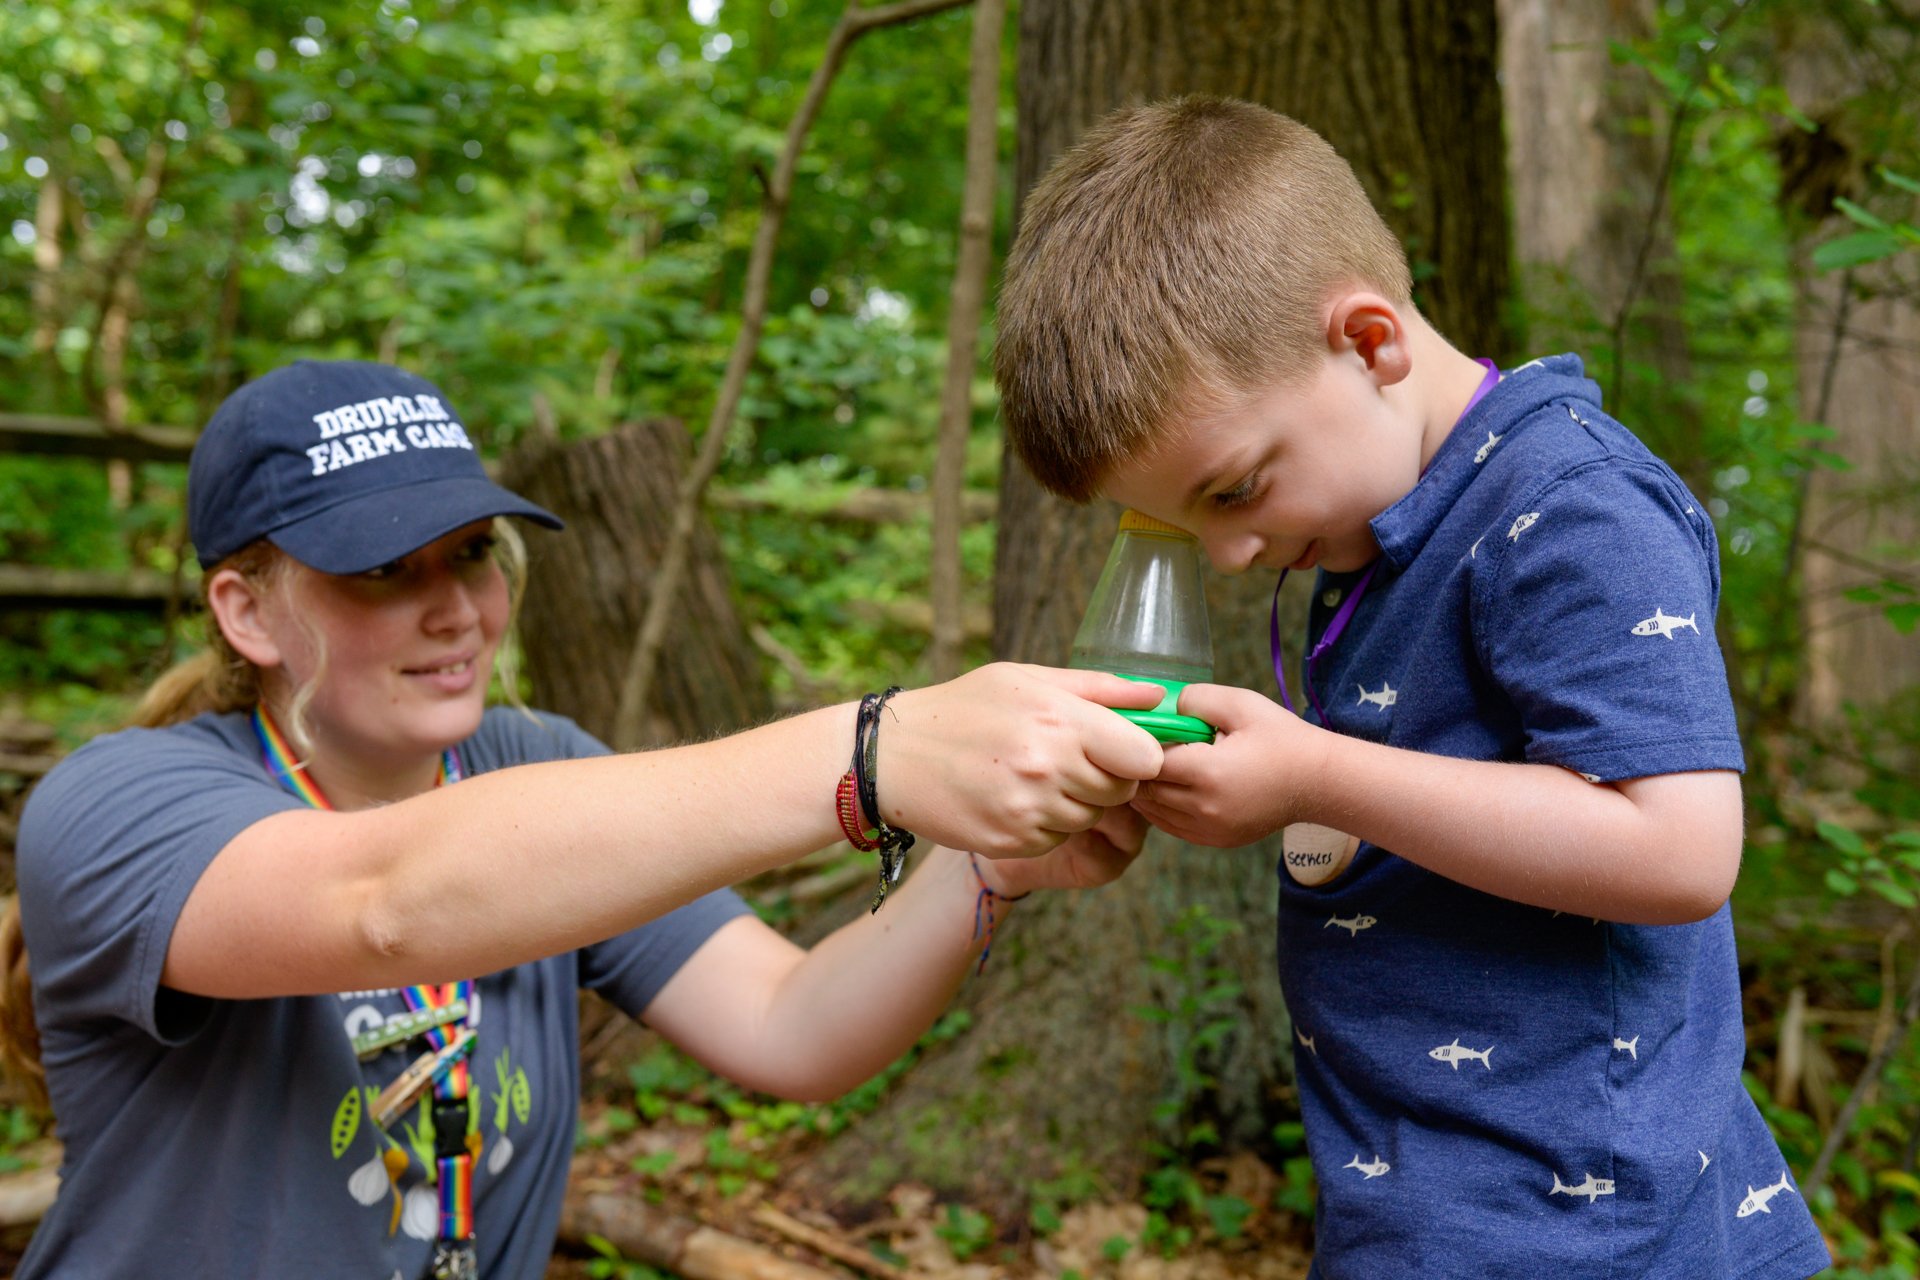 A counselor at Drumlin Farm Camp holds a magnifying bug catcher for a camper who is peering inside